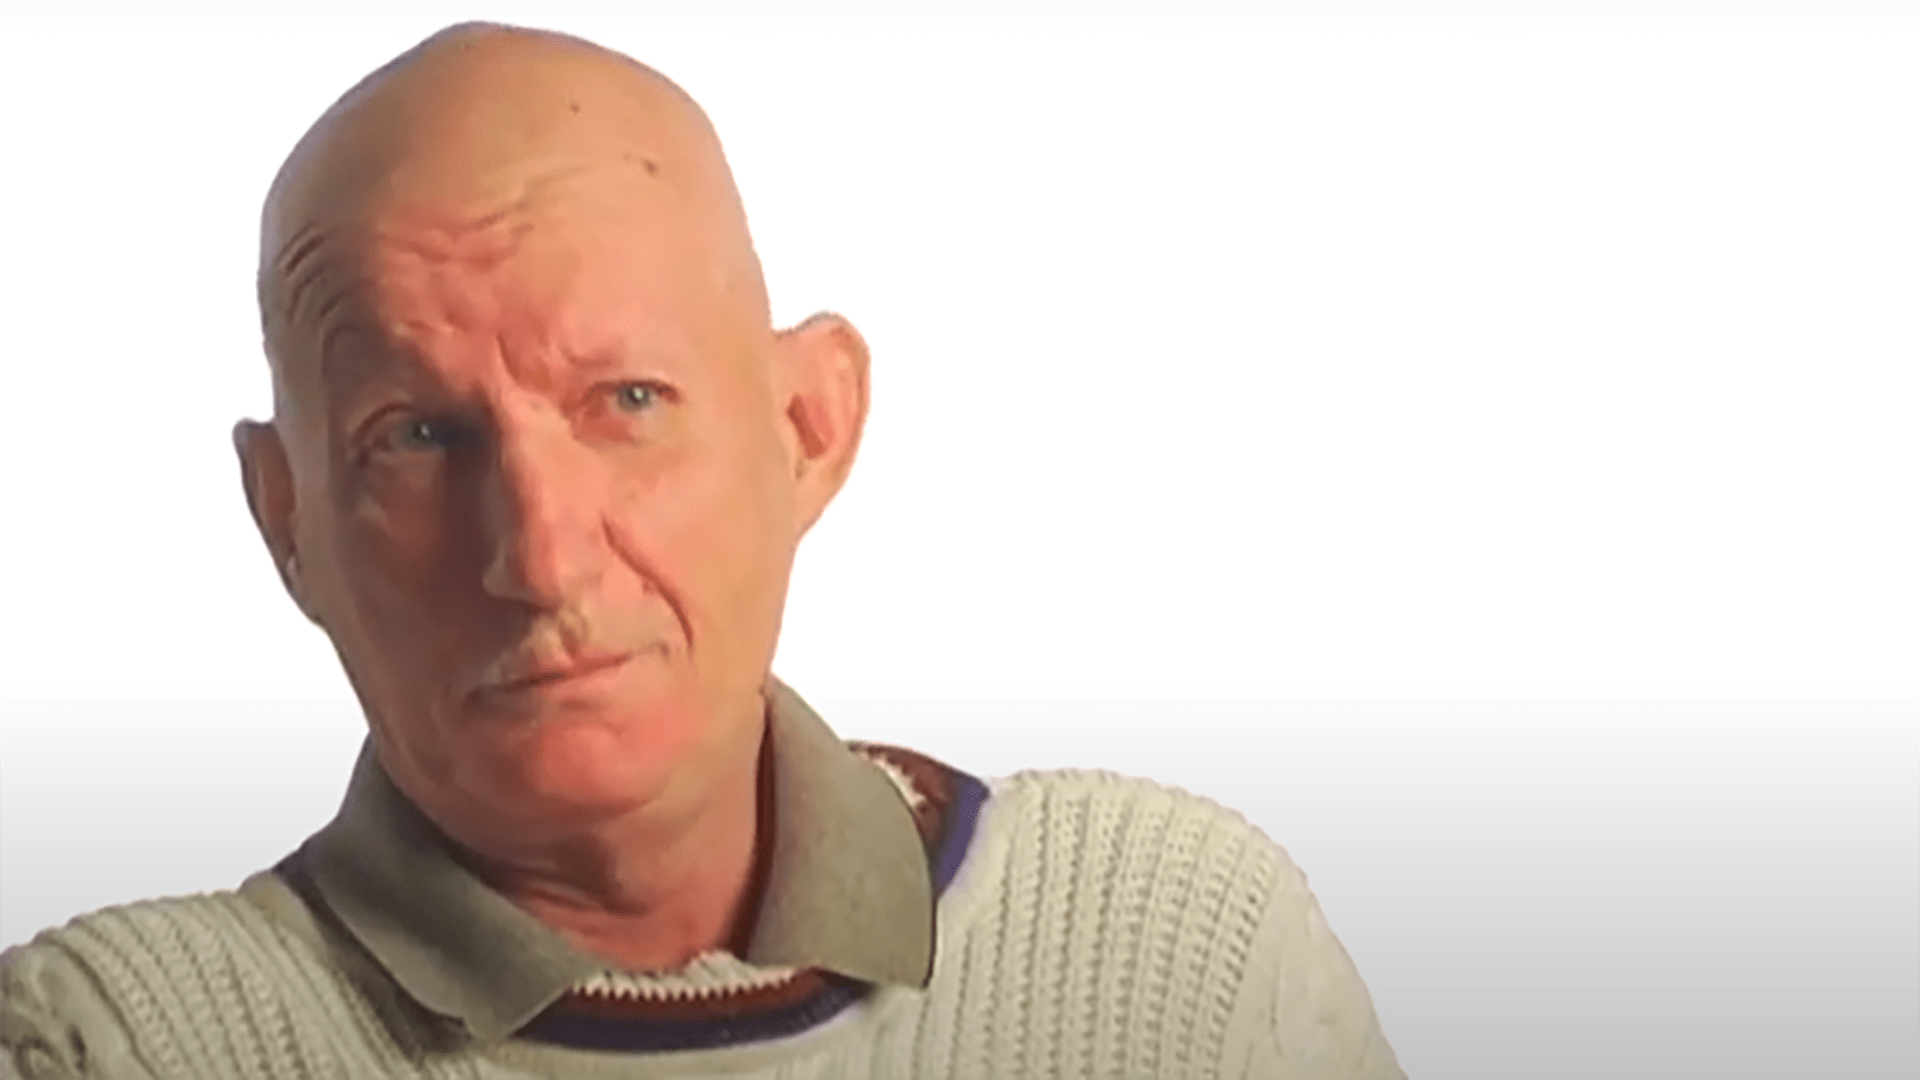 A bald middle aged gentleman is interviewed wearing a white sweater